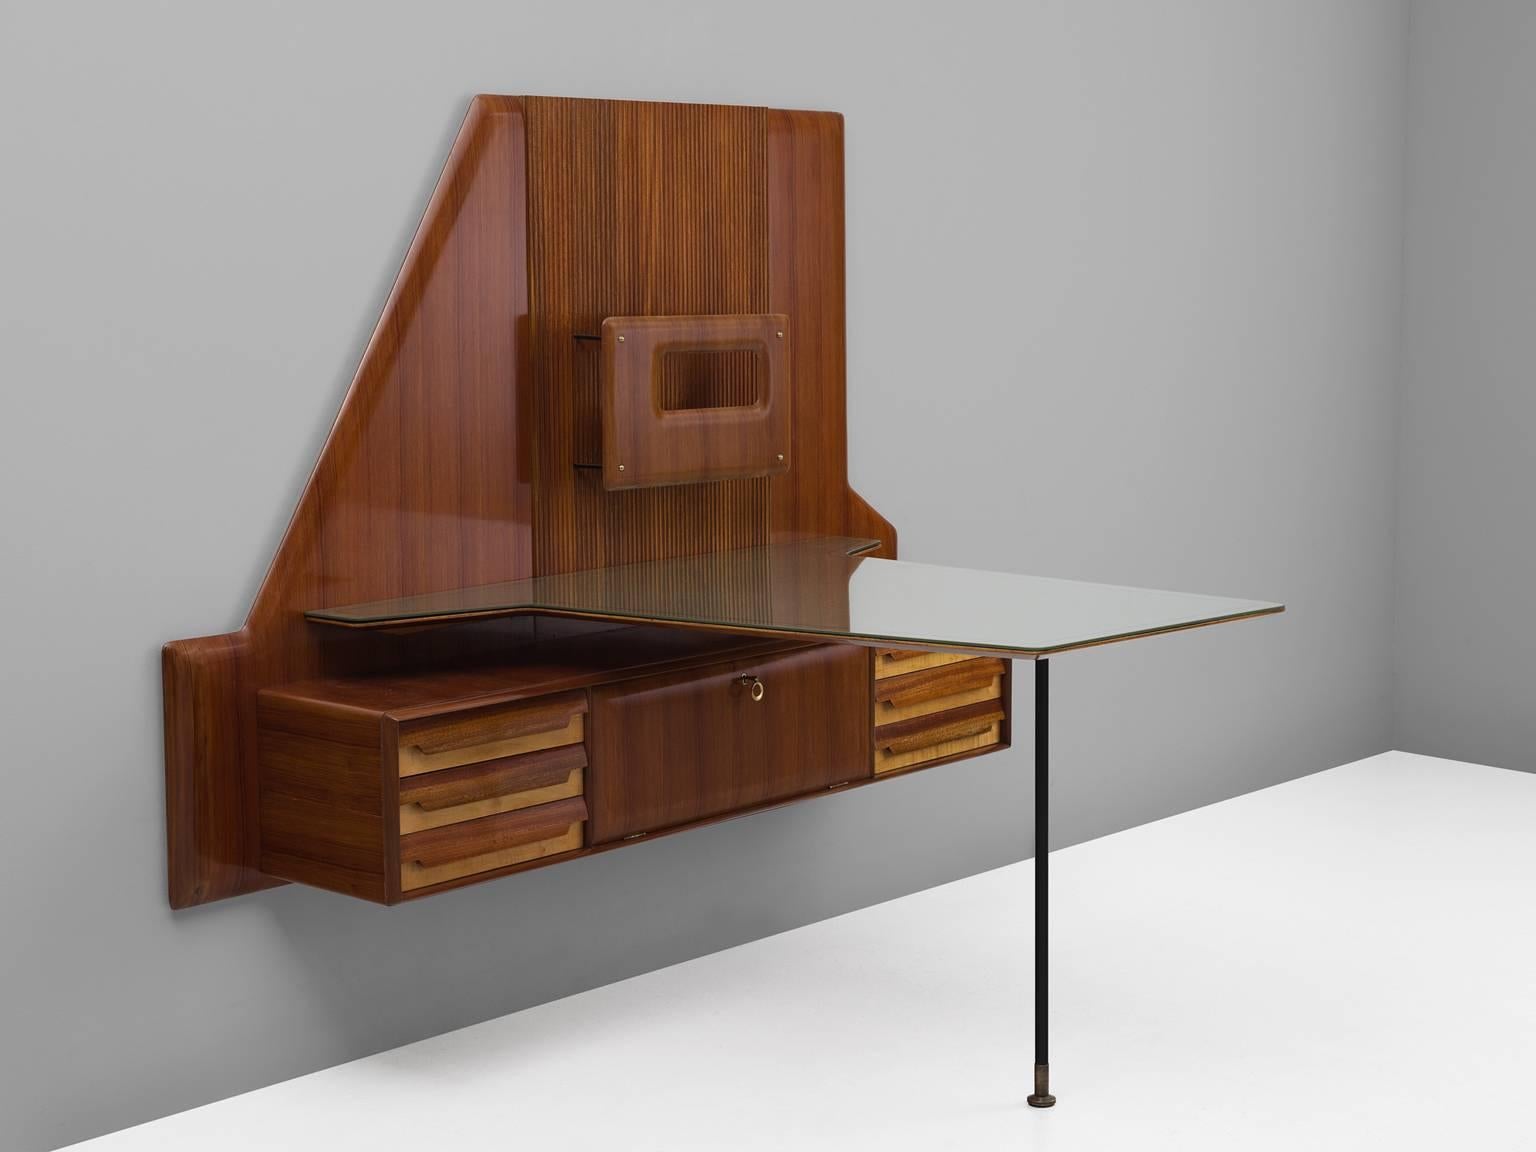 Attributed to Gio Ponti, wall-unit, mahogany and brass, Italy, 1950s. 

Wall console in different sorts of wood, attributed to Italian designer Gio Ponti. Rare wall-mounted desk with glass top. Highly refined bar cabinet in both design and